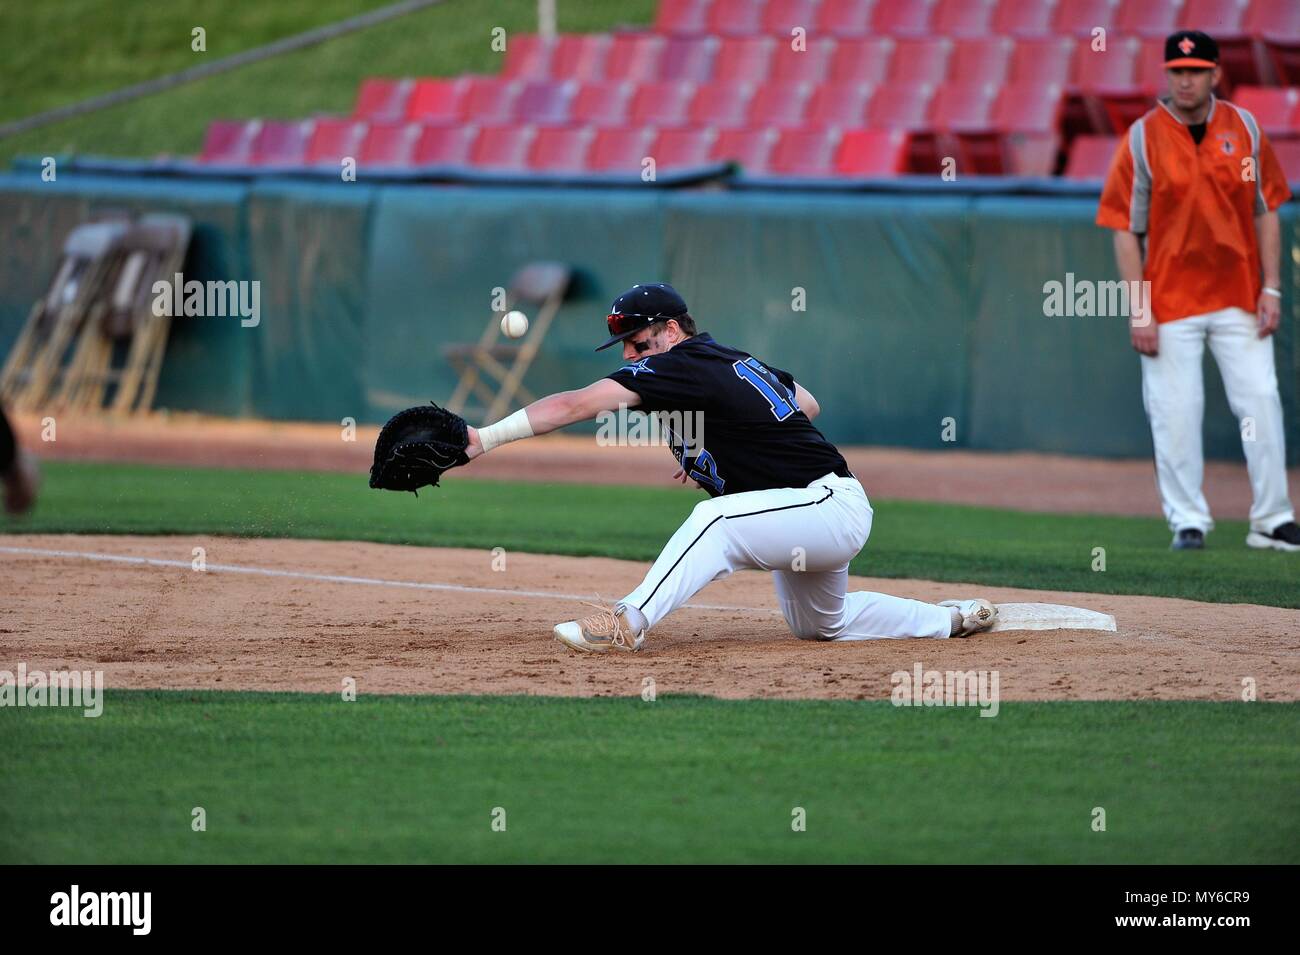 First baseman unable to dig out a low throw at first base. USA. Stock Photo